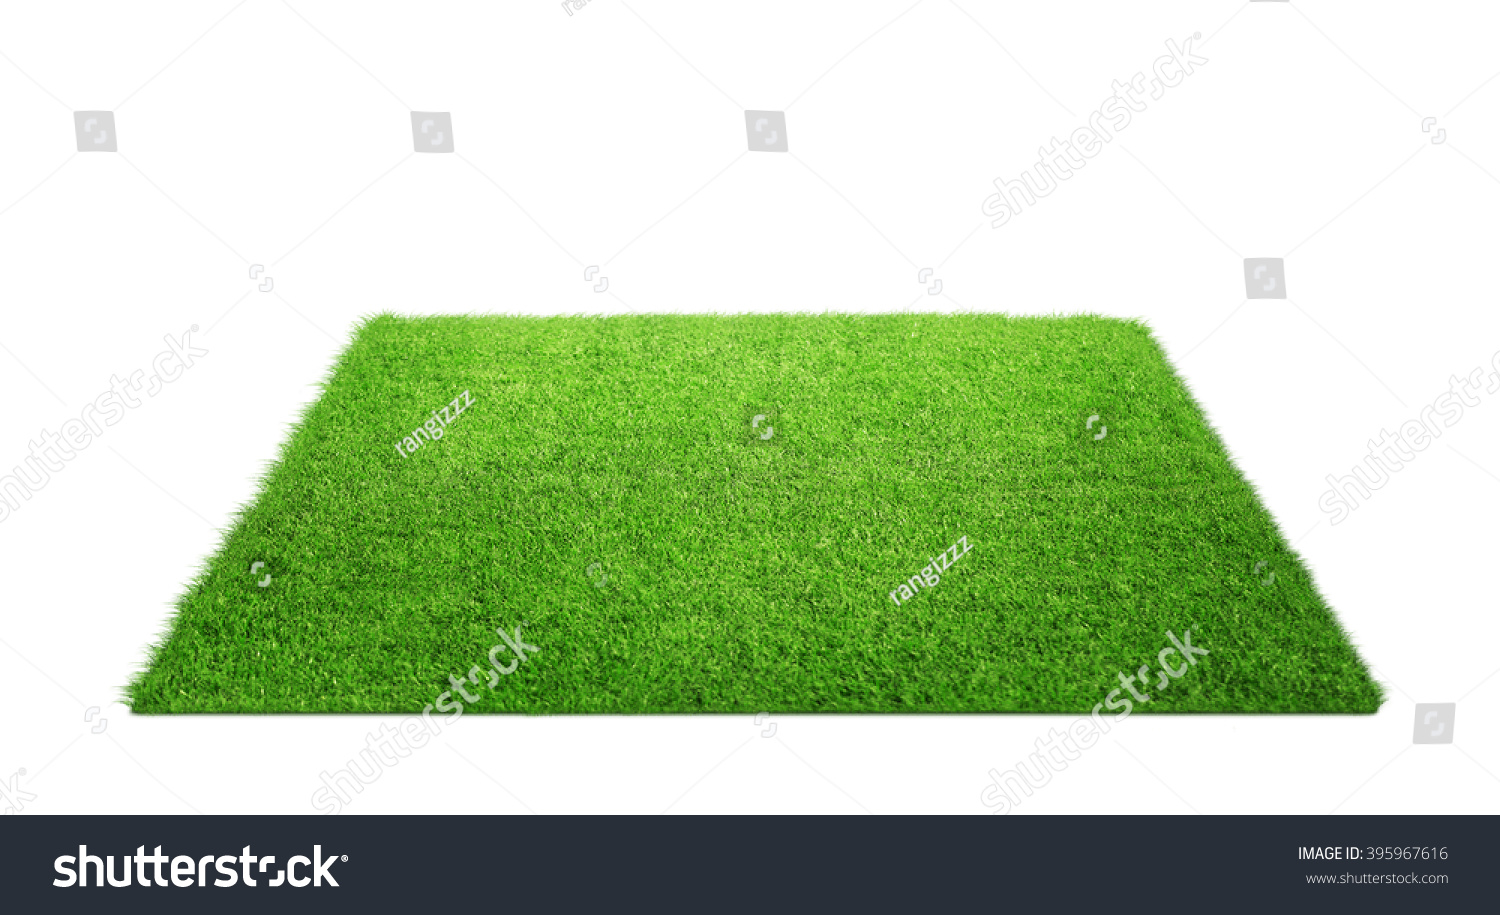 Close up of grass carpet isolated on white background with copy space #395967616